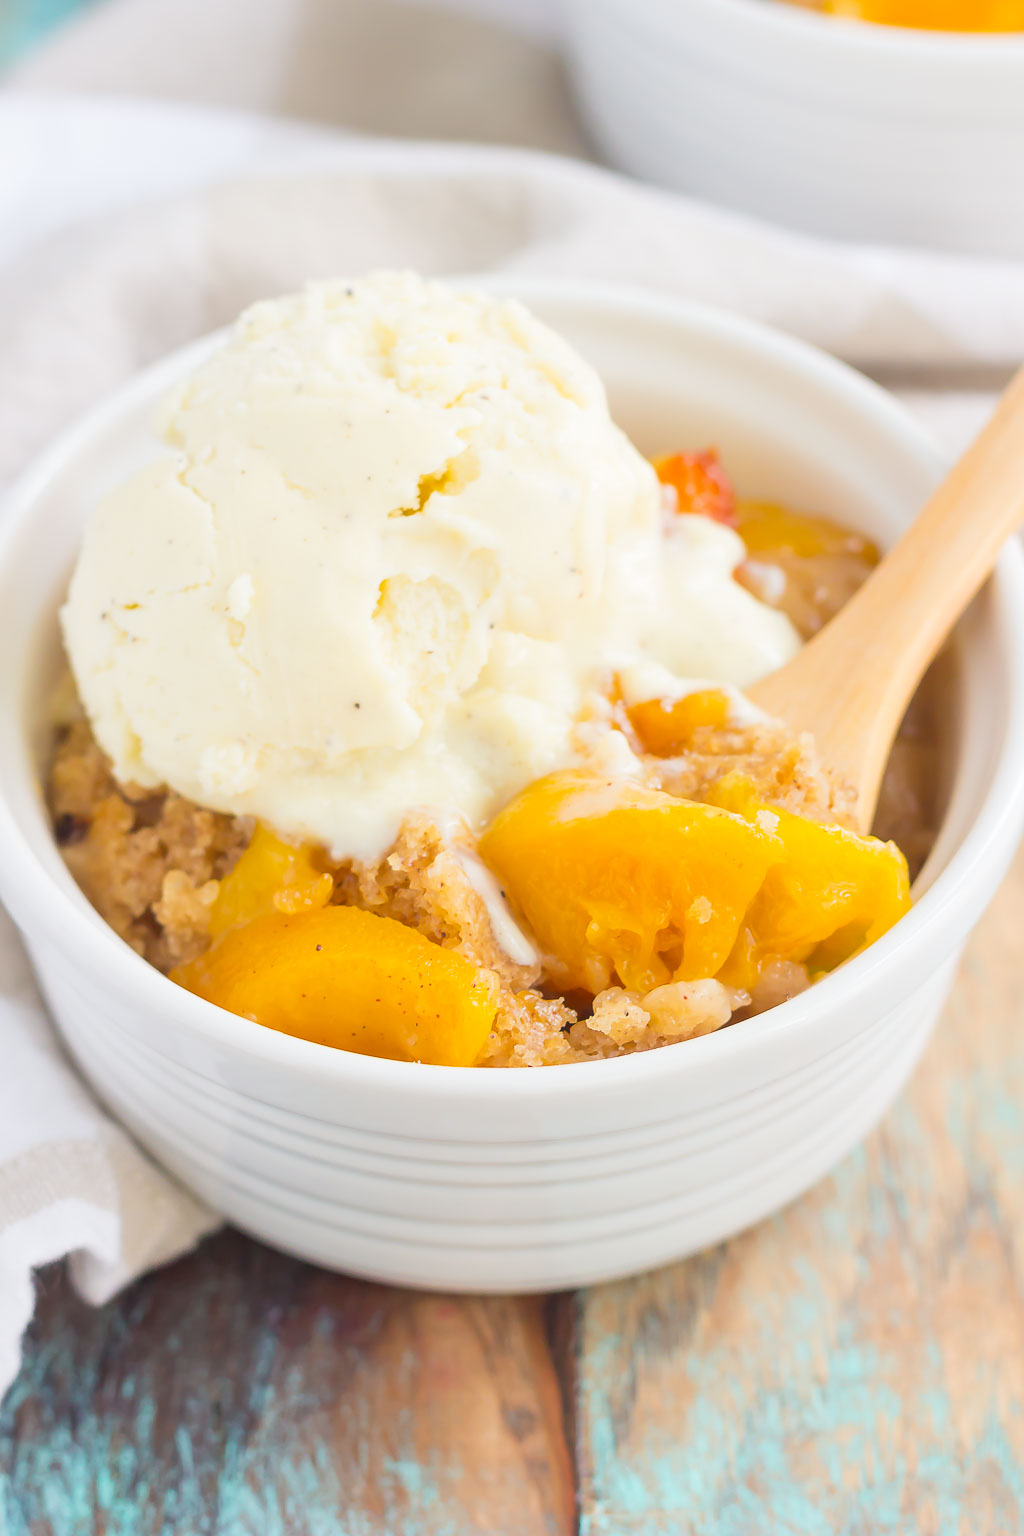 This Slow Cooker Peach Cobbler is loaded with juicy peaches, a sprinkling of cozy spices, and layered with a crispy, cakey topping. Just throw everything into the slow cooker, set it, and forget it. In just a few hours, you'll have a warm and flavorful dessert ready to be devoured!